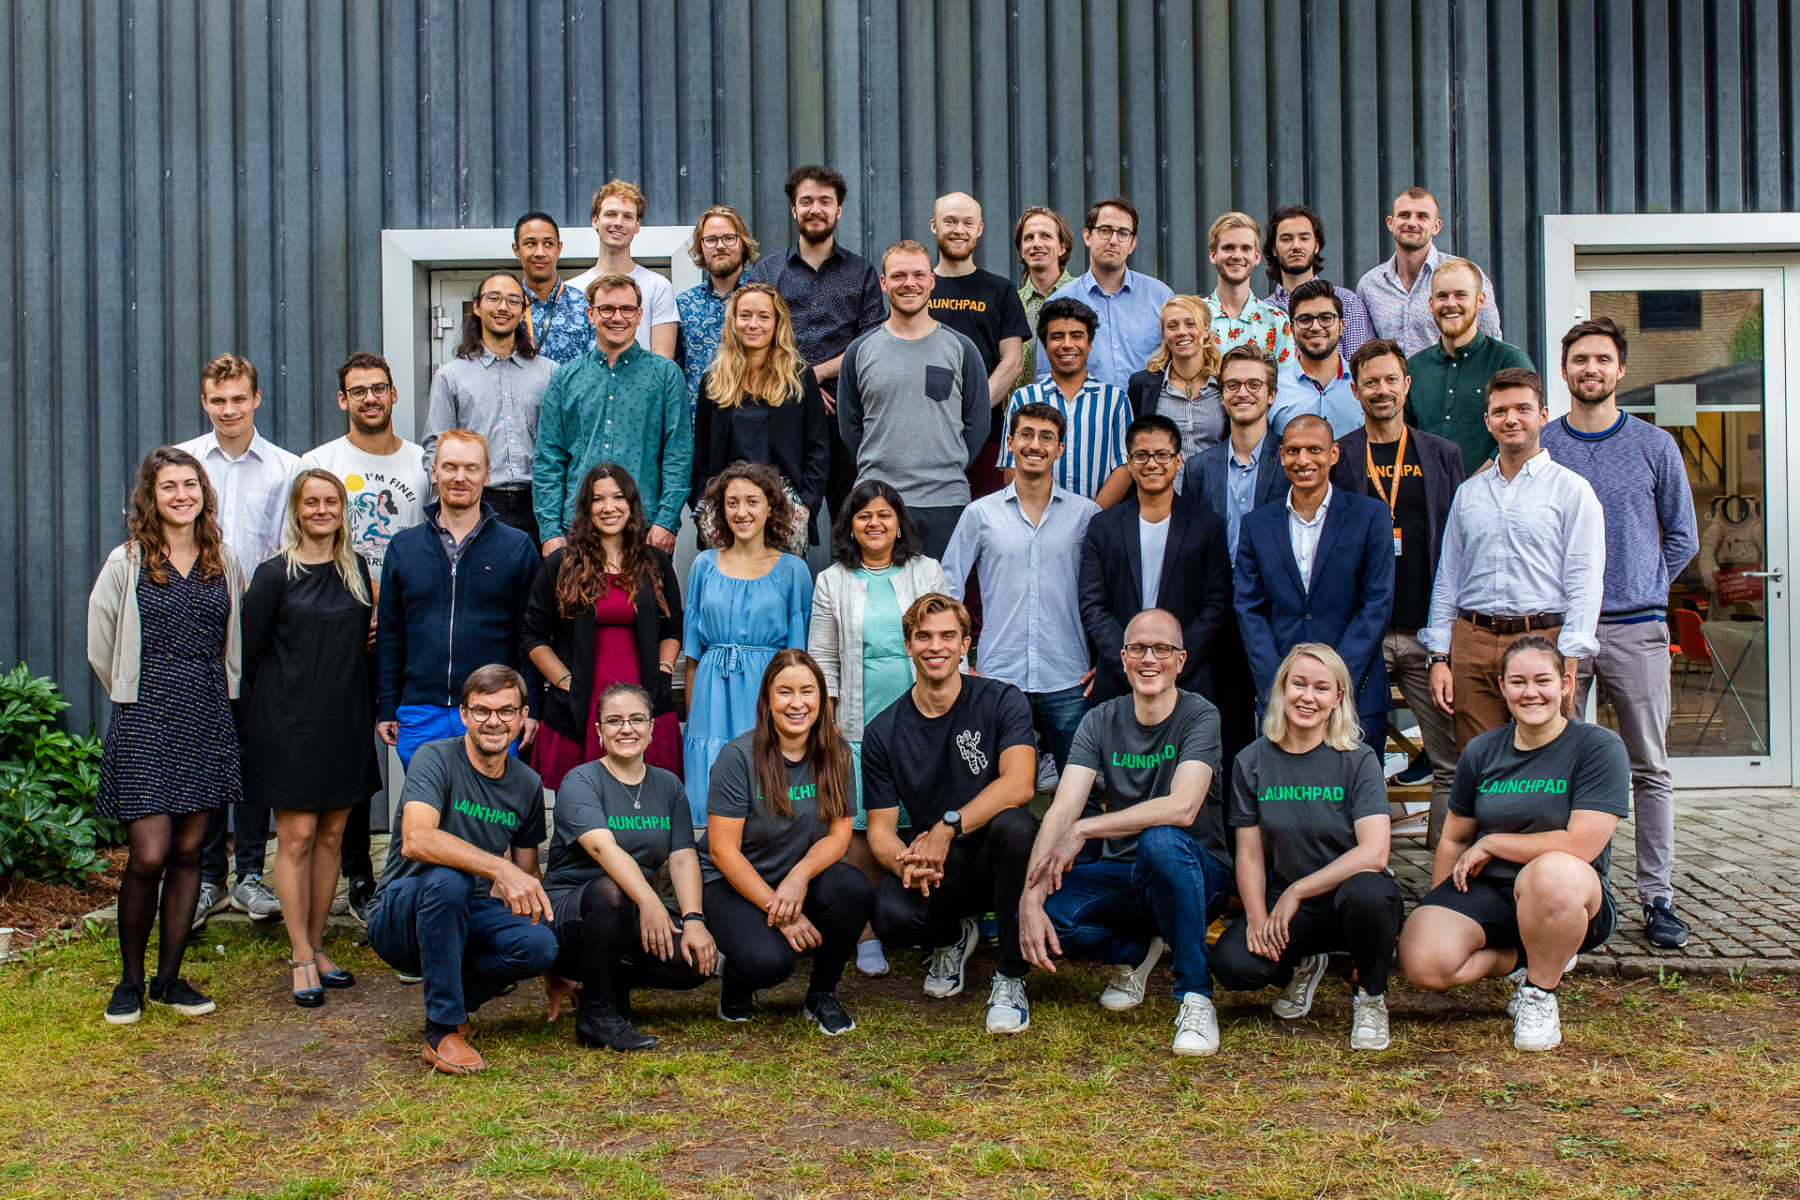 Kicked off by ESA BIC Denmark, the 12-day intensive entrepreneurship pre-incubation programme Launchpad was attended by 40 participants from Denmark, Sweden, Spain, Germany, Hungary, Italy, Iran, India and Mexico. They are shown here with the ESA BIC Denmark organising team. Image credit: Kaare Smith/ESA BIC Denmark